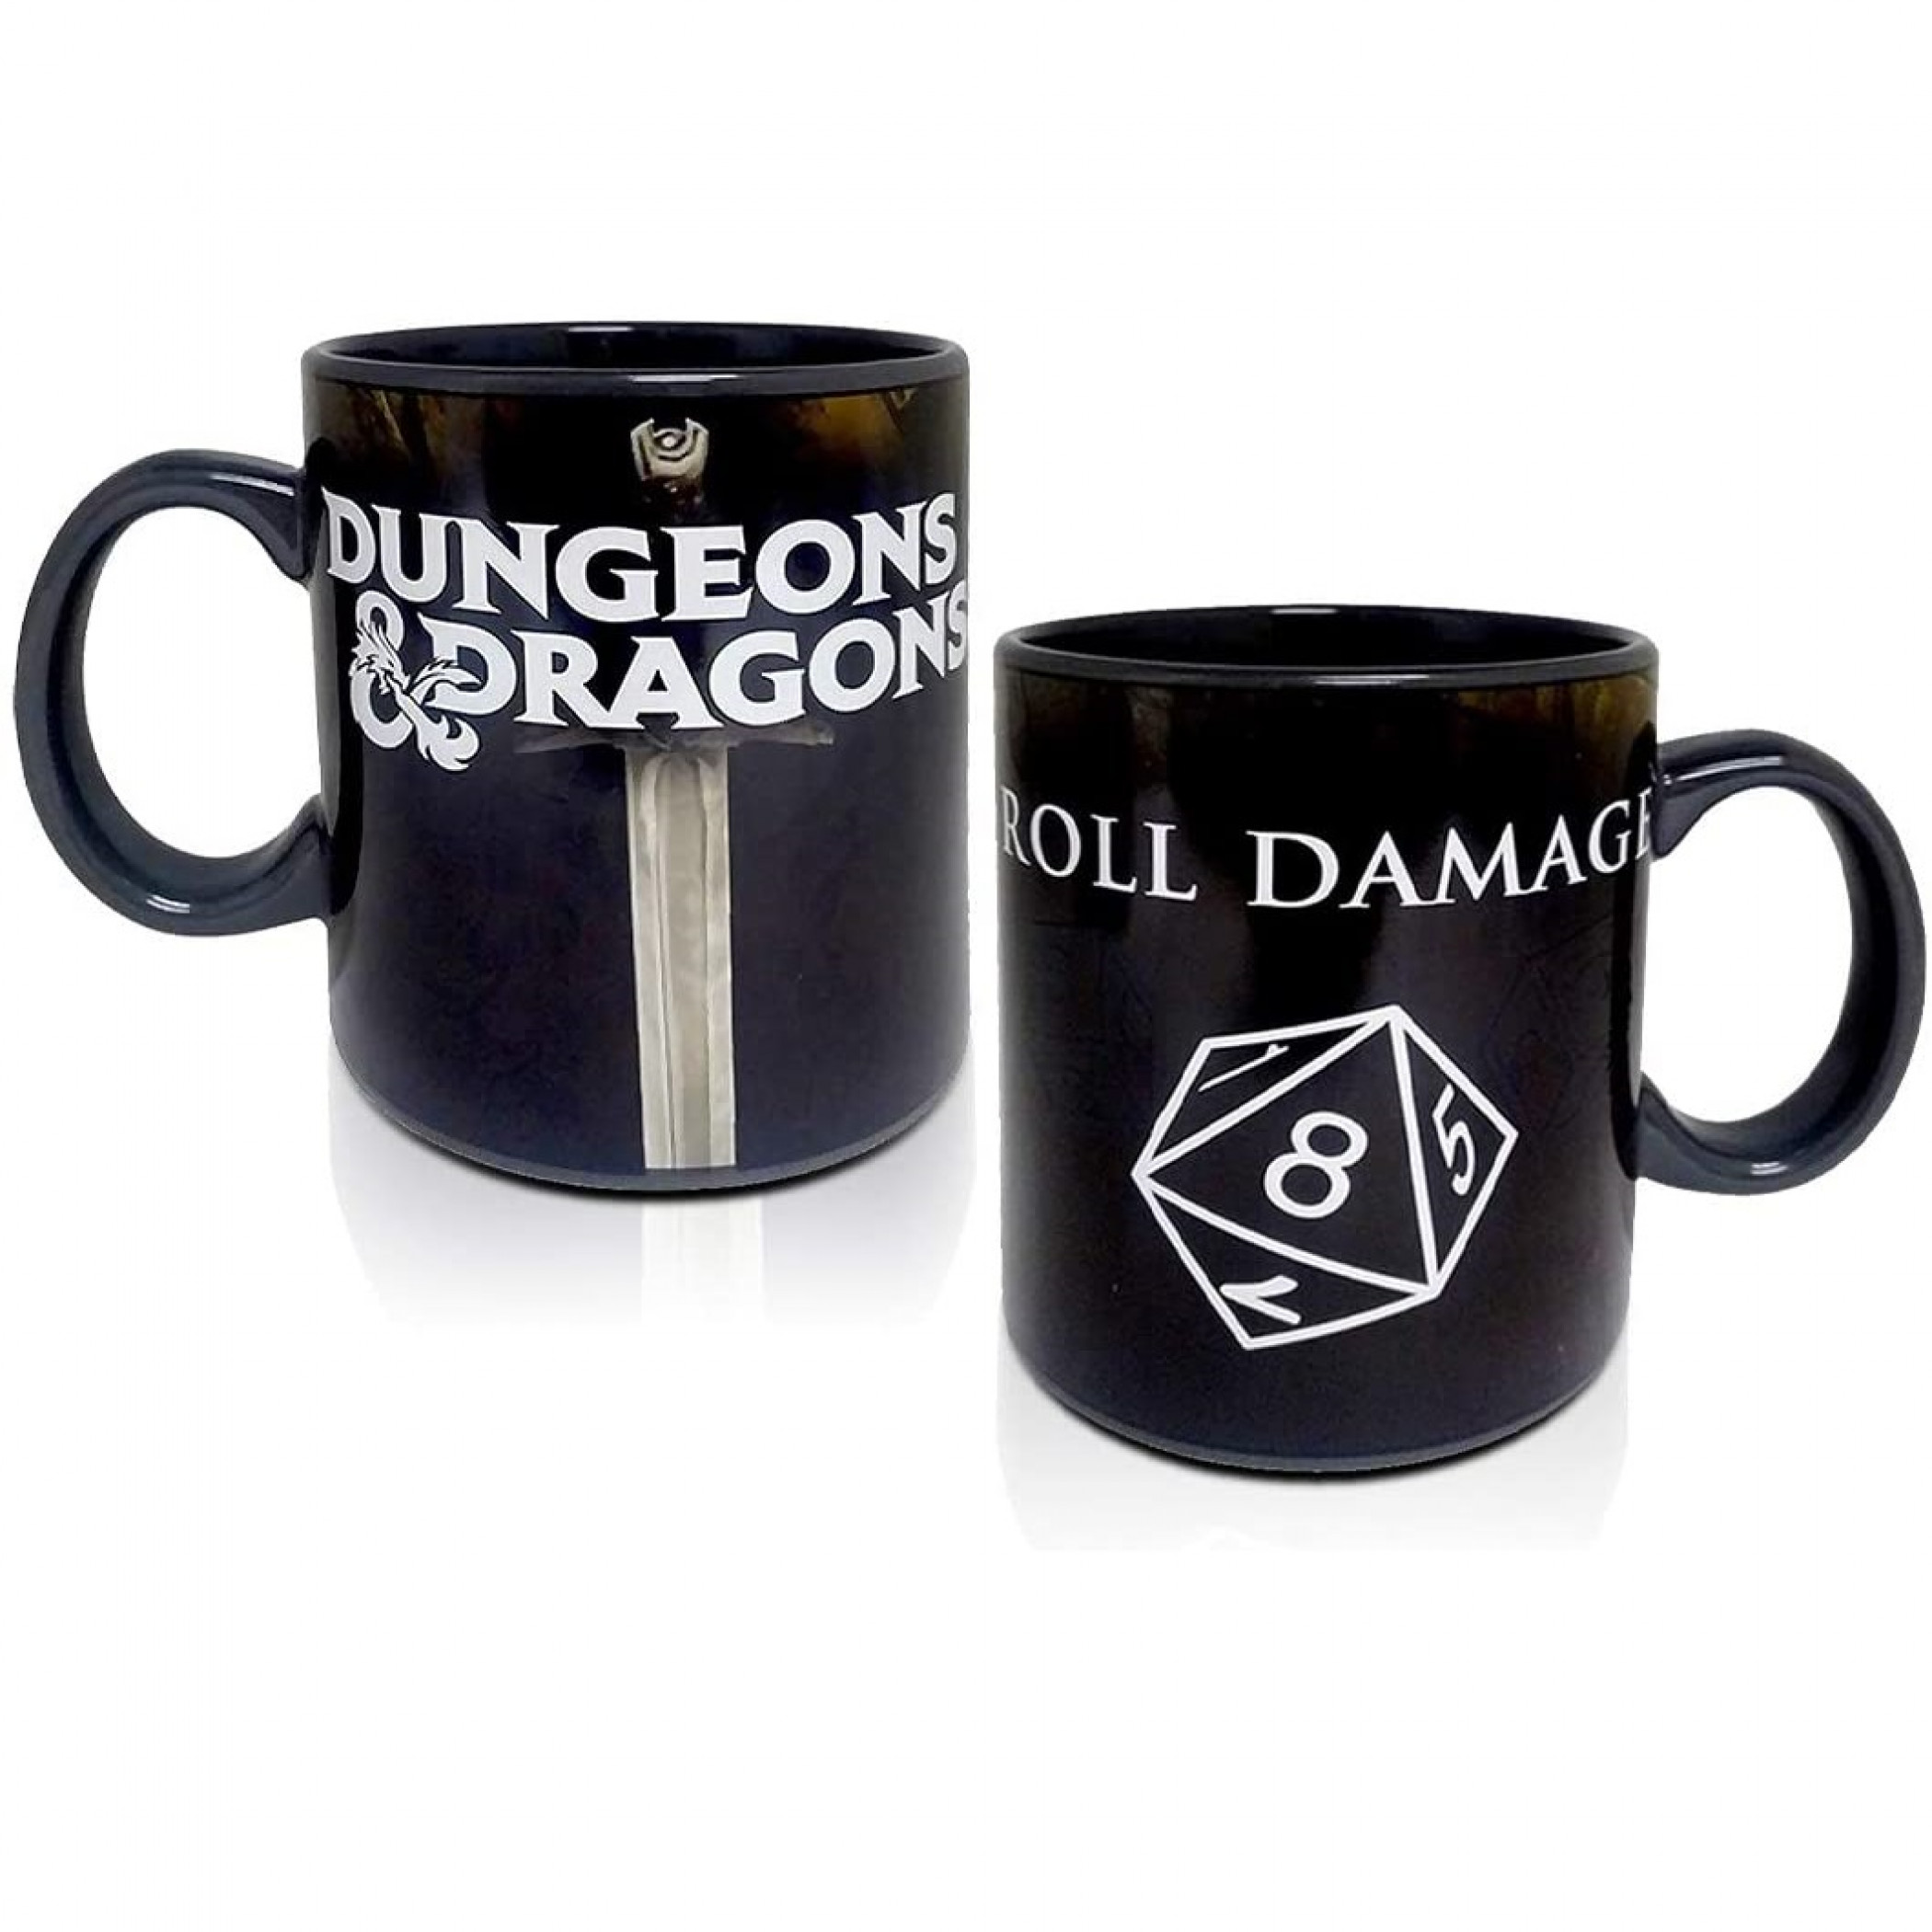 Dungeons and Dragons Roll Damage Color Change 16 Ounce Mug